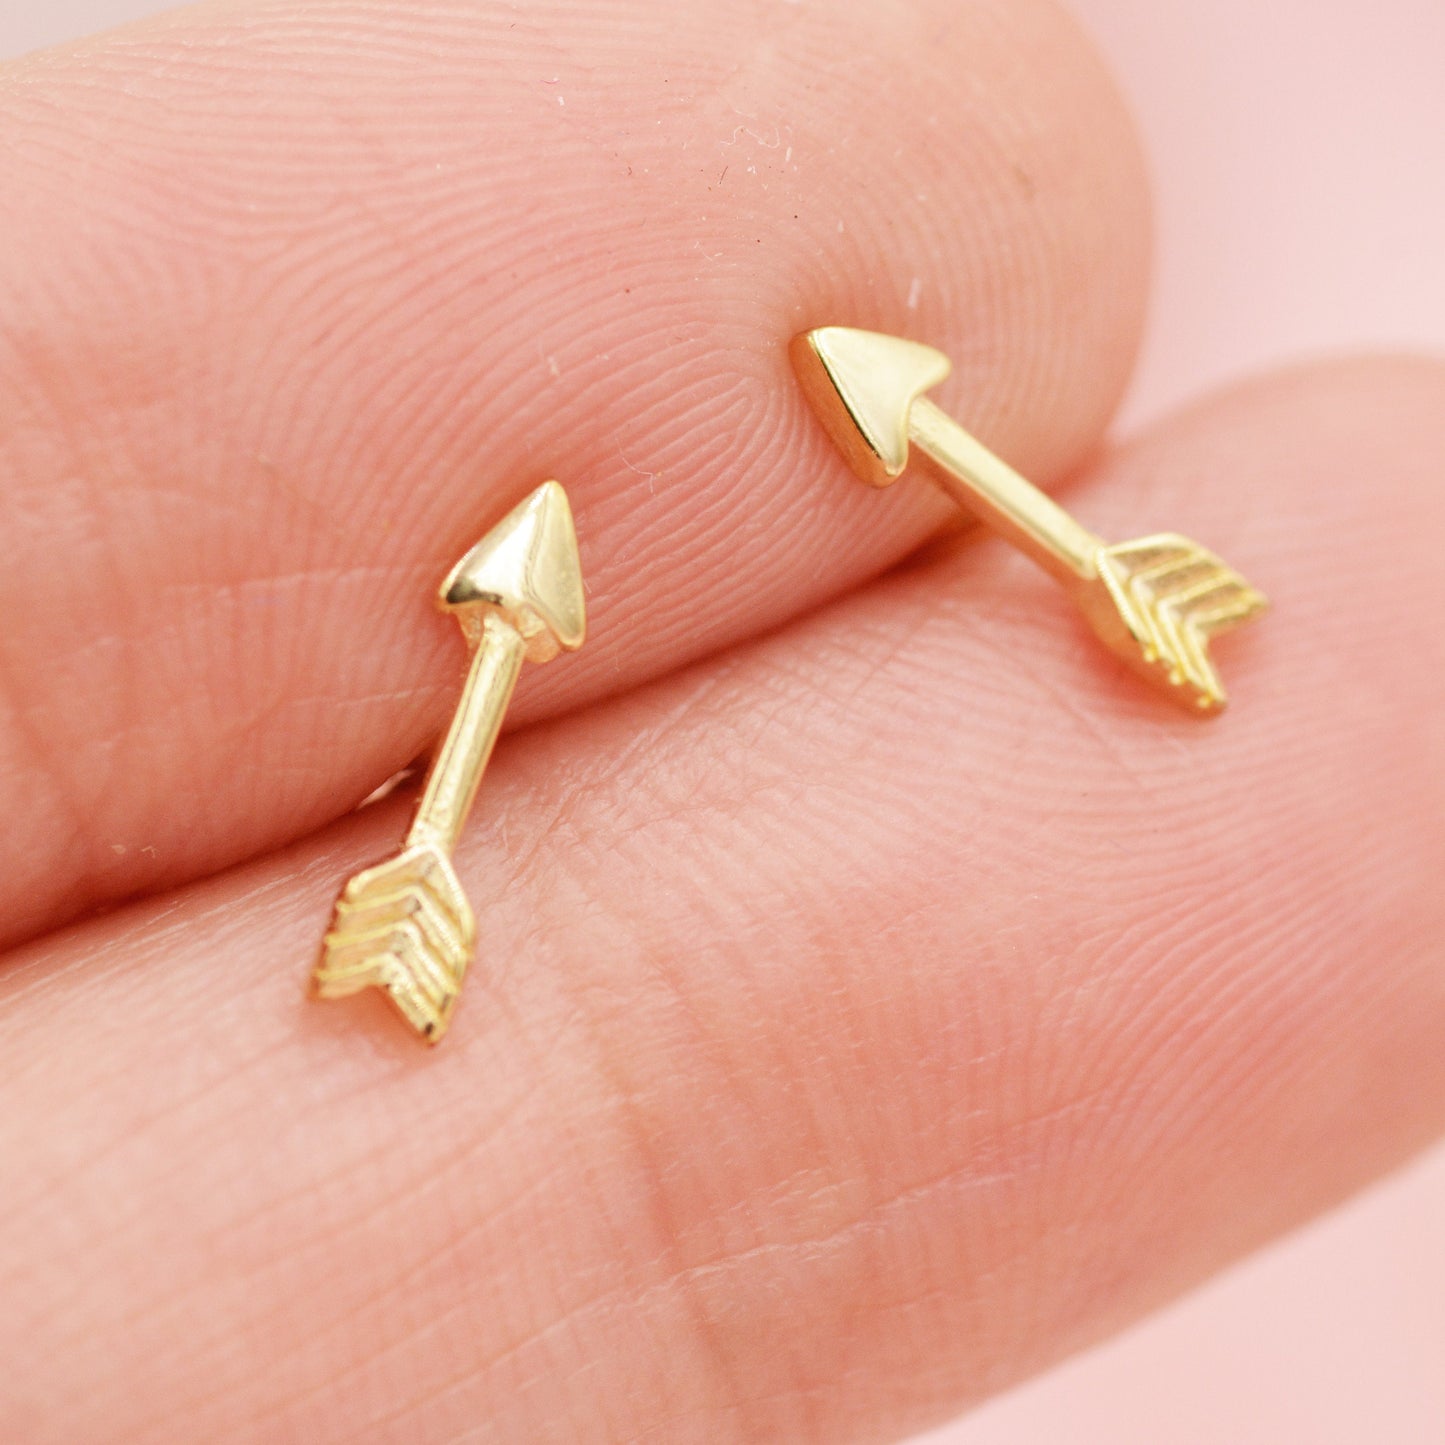 Sterling Silver Tiny Little Arrow Stud Earrings, Silver or Gold,  Dainty, Cute, Quirky and Fun Jewellery